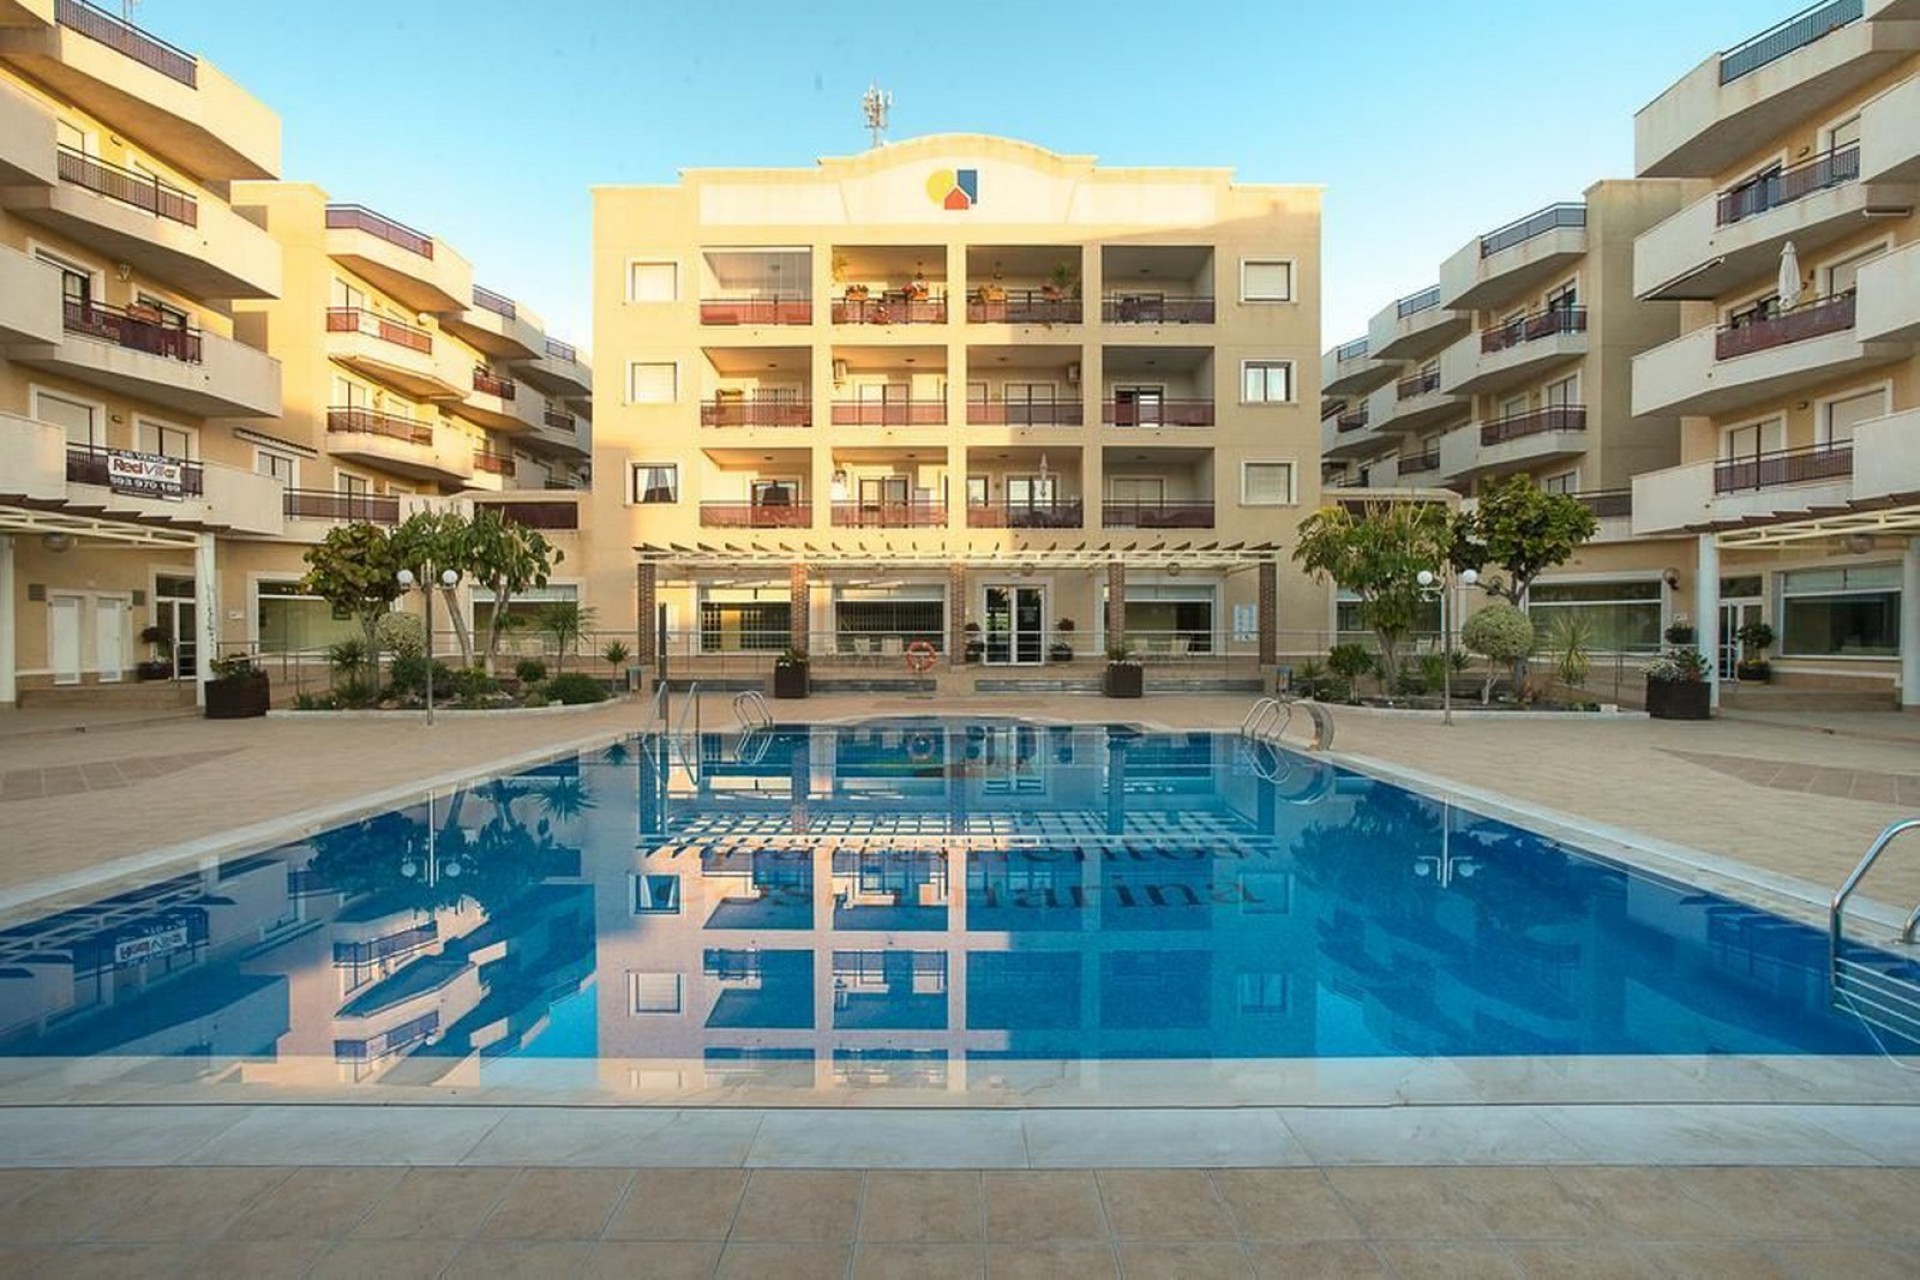 3 bedroom apartment / flat for sale in Cabo Roig, Costa Blanca